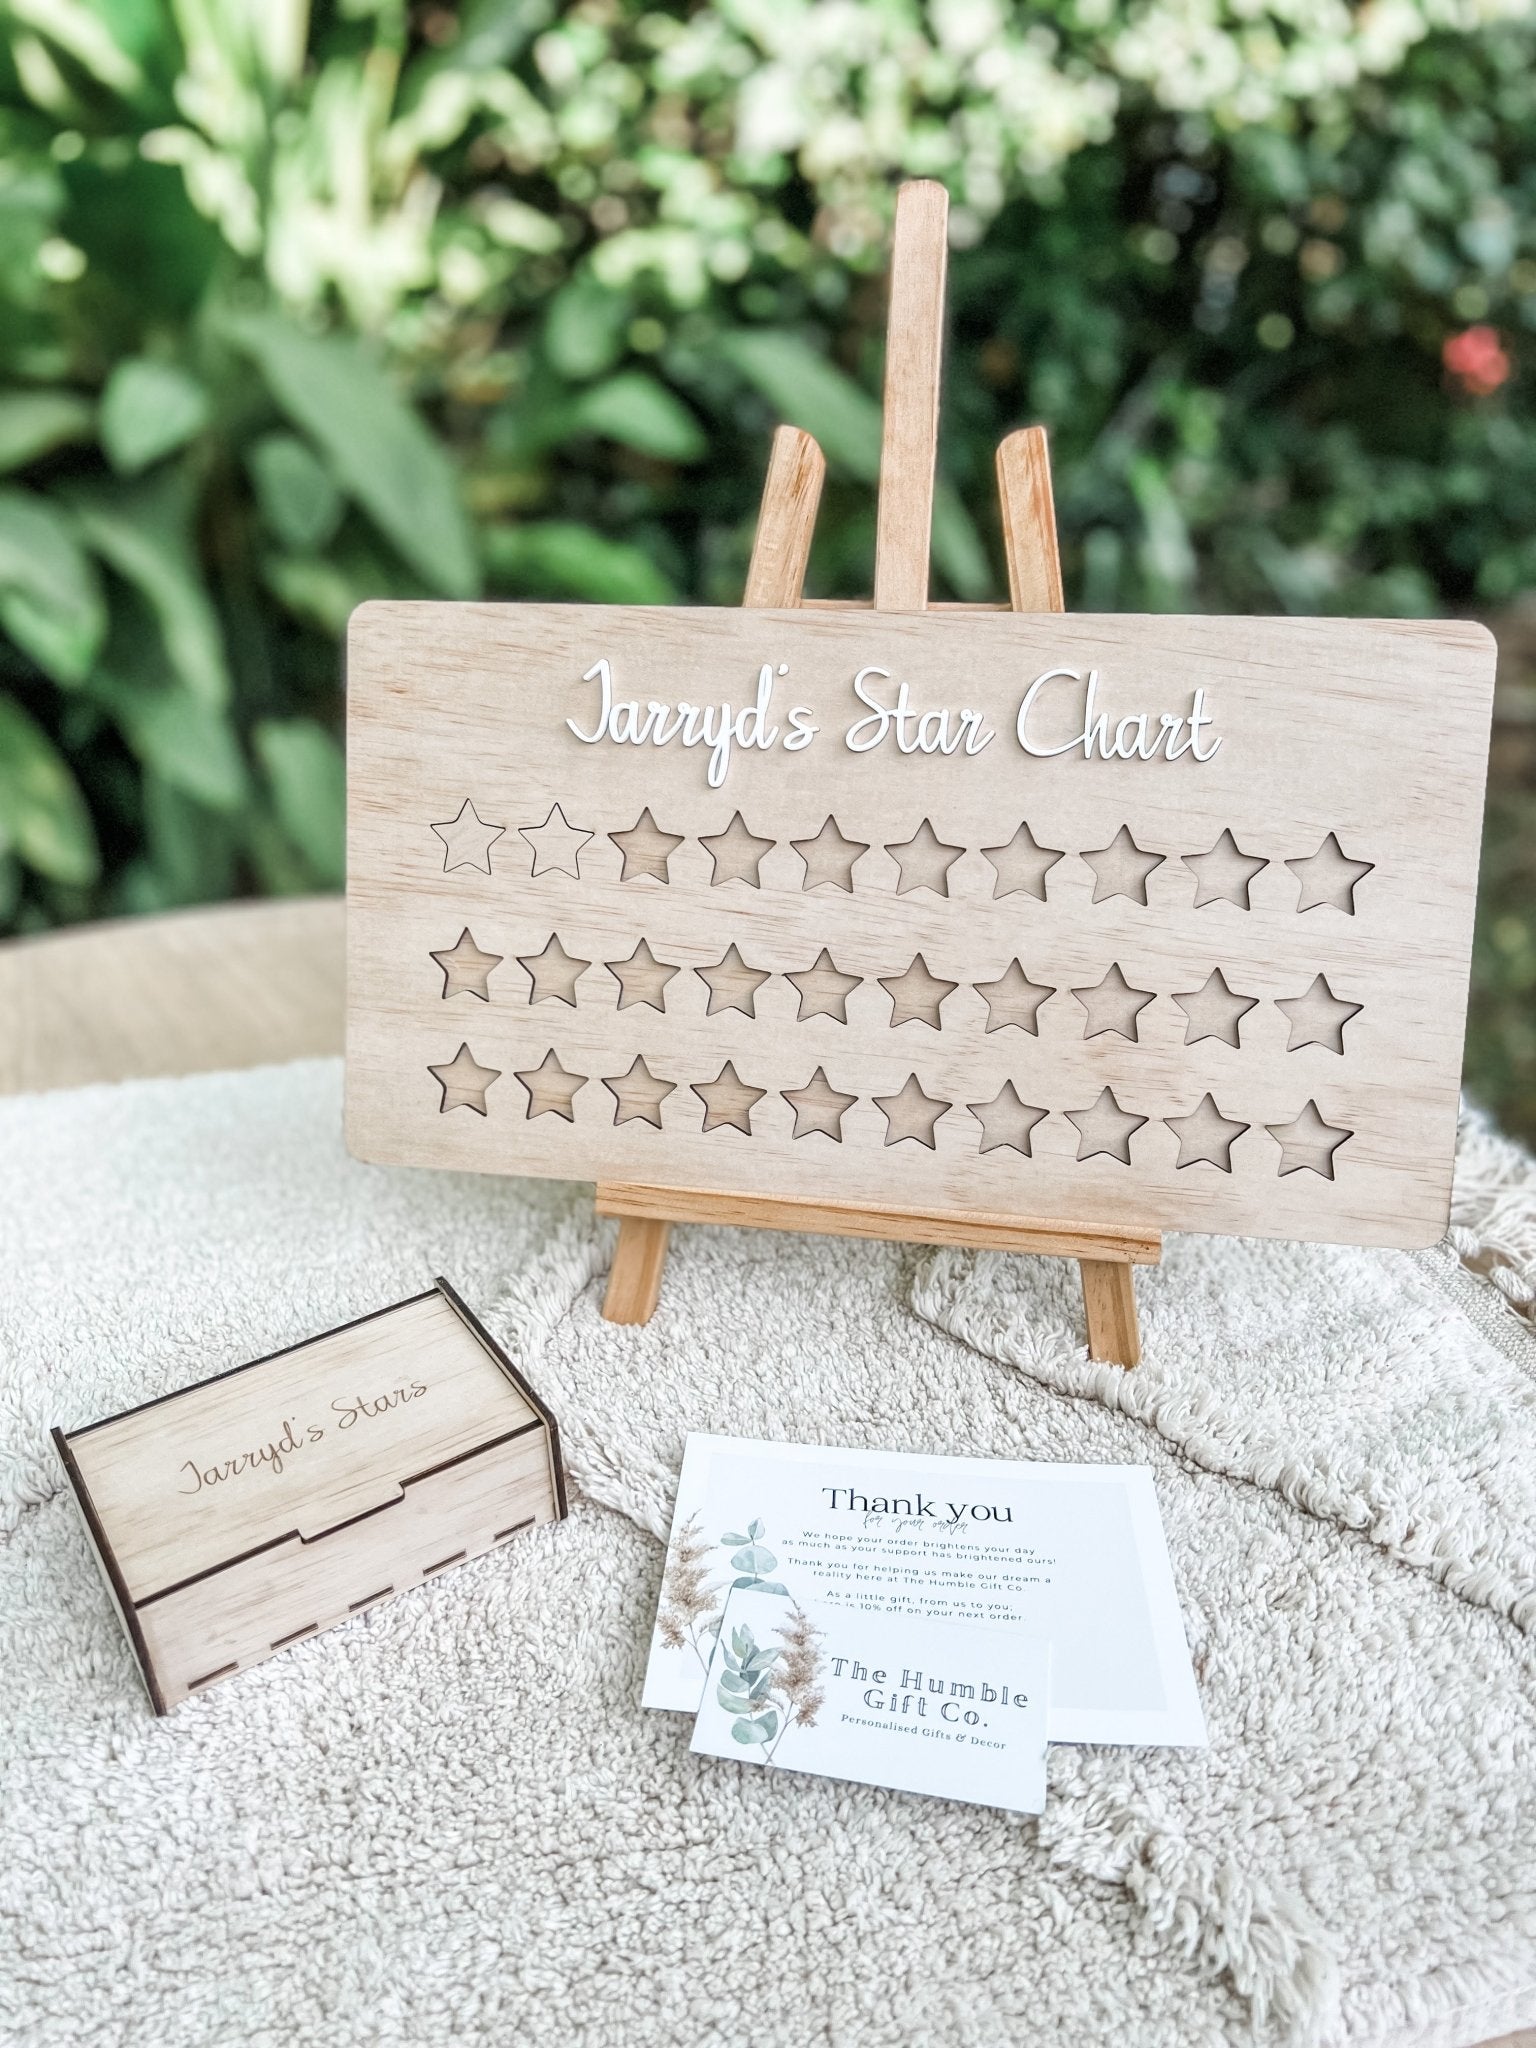 Rewards Chart for one Child - The Humble Gift Co.